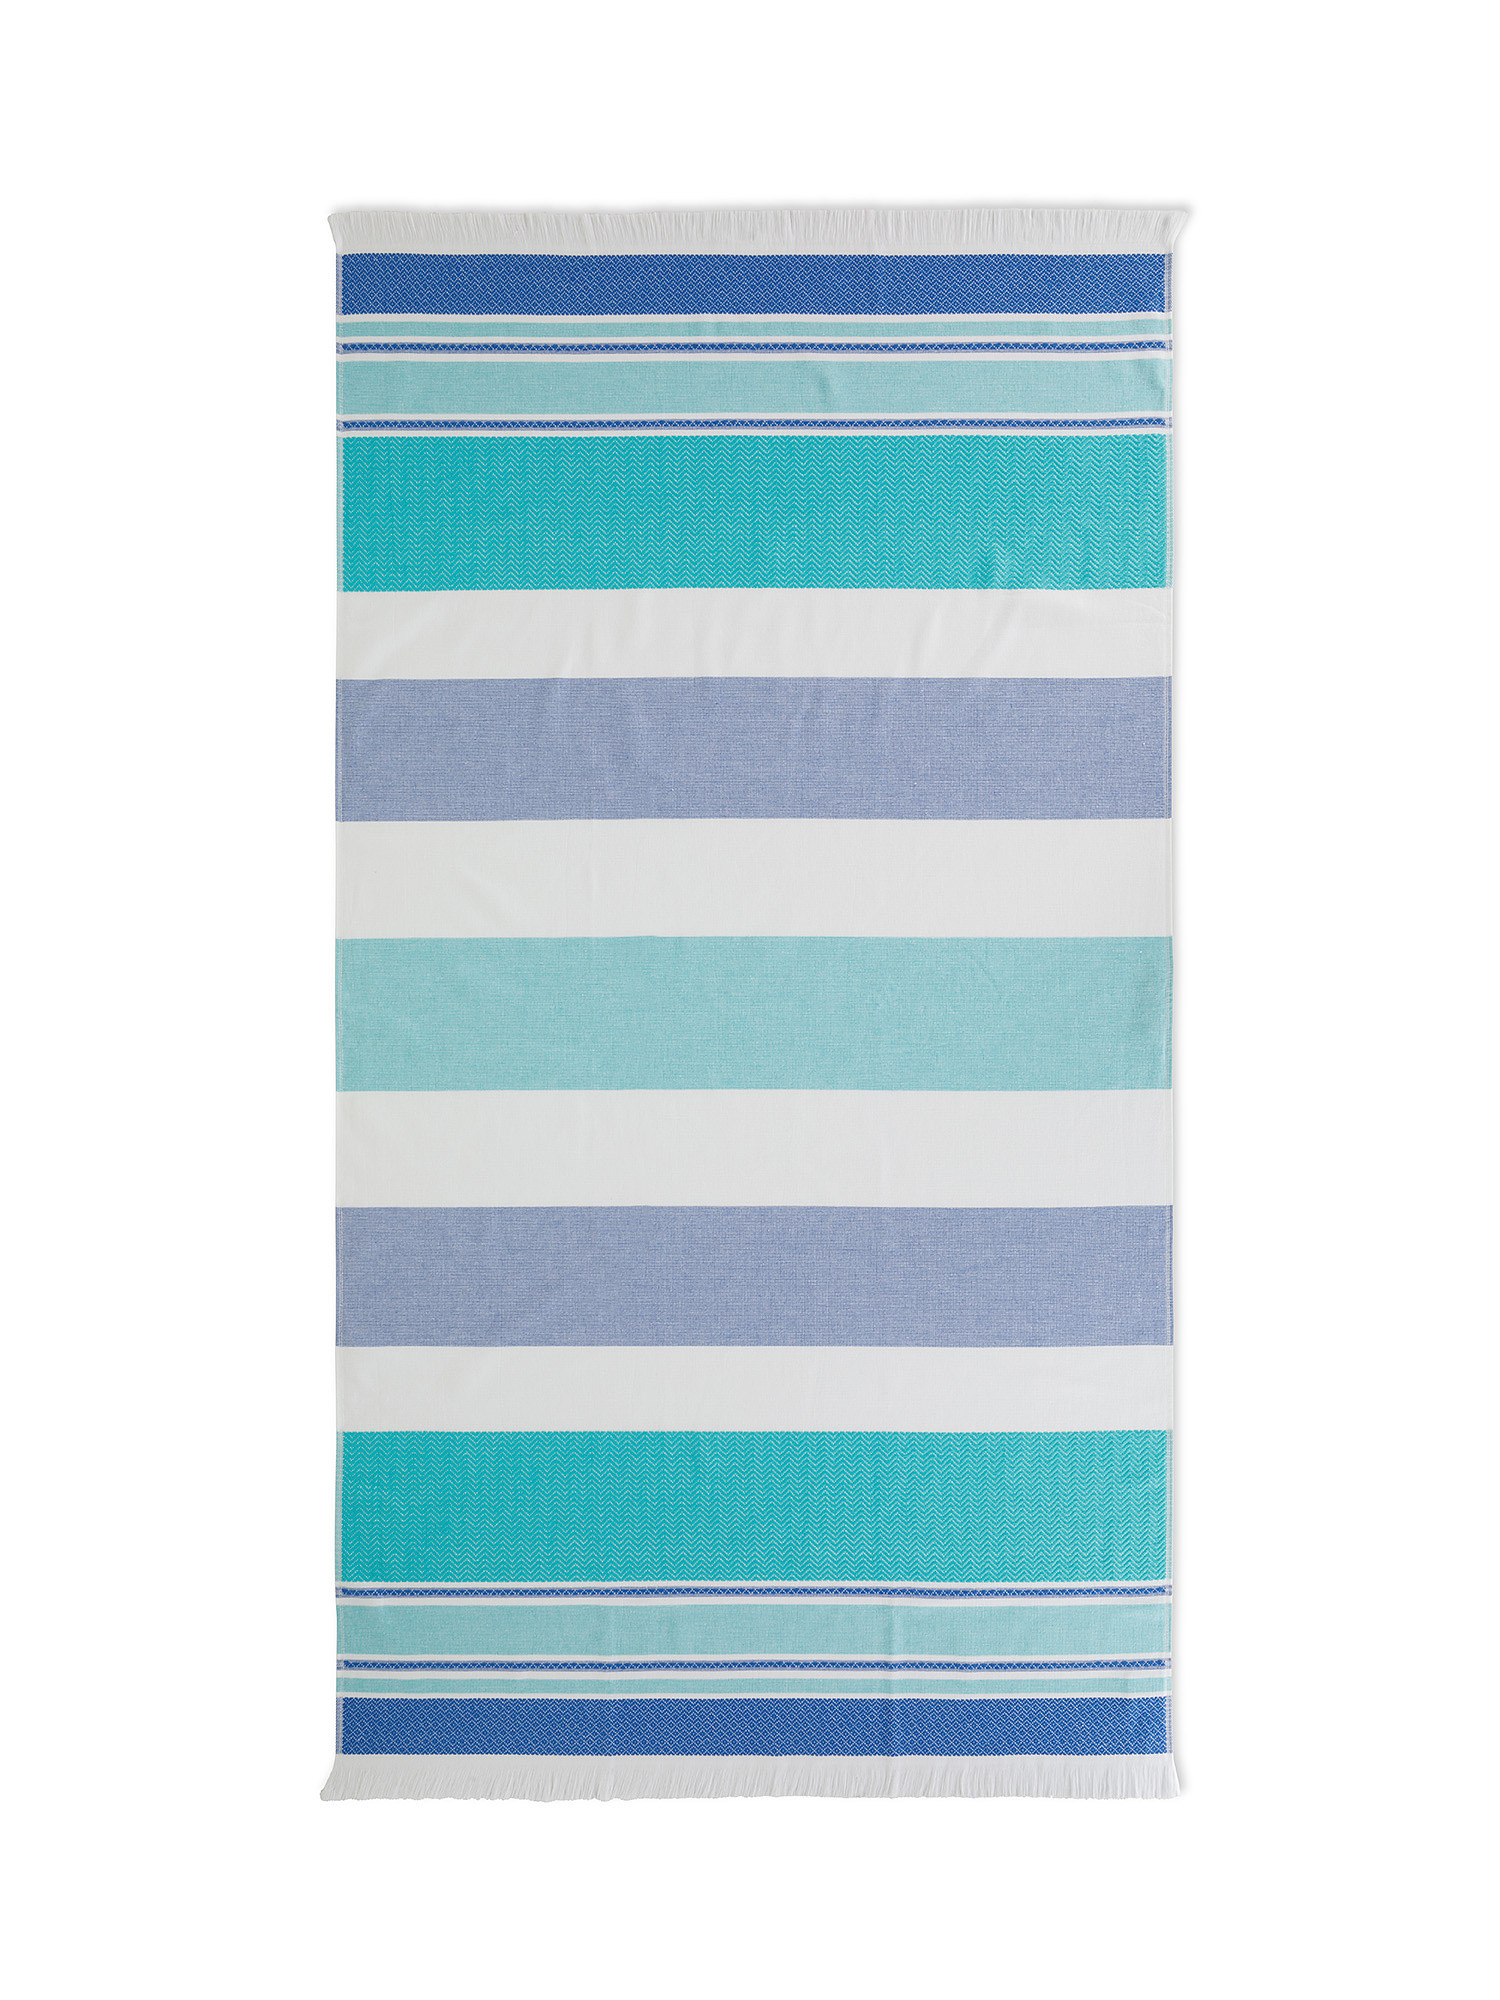 Striped jacquard cotton hammam beach towel, Teal, large image number 0